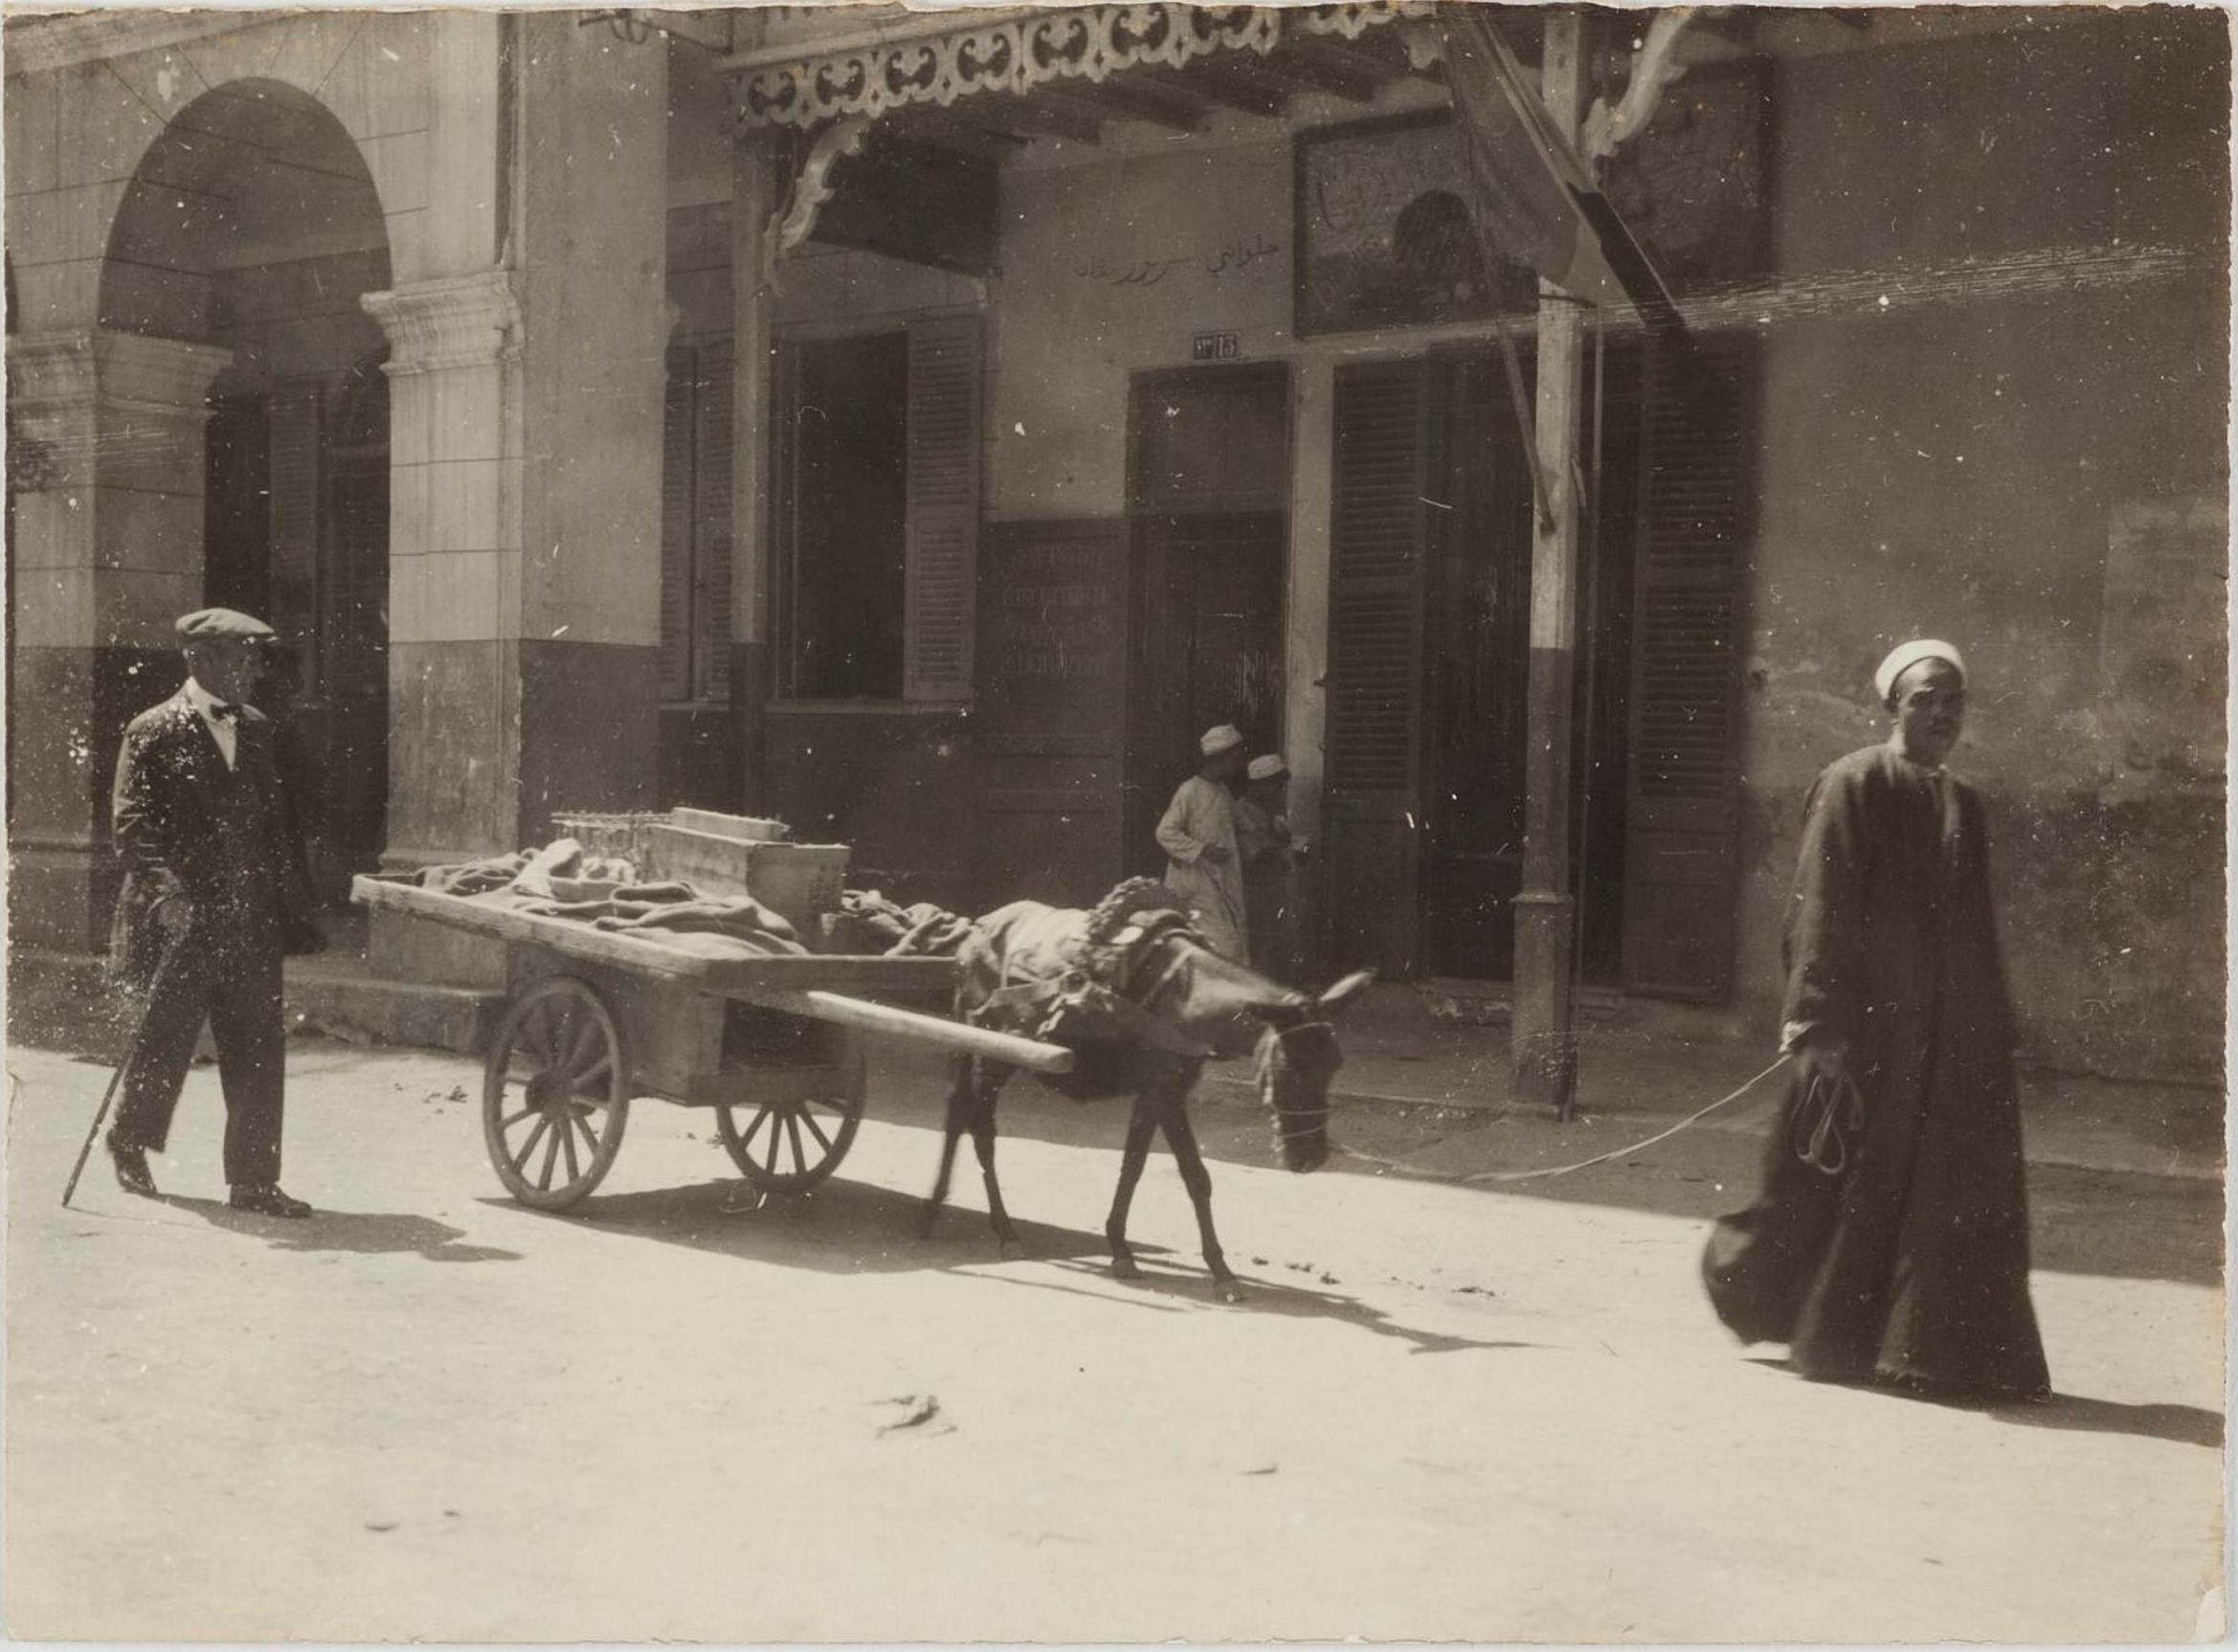 Port Said, Egypt, 18 April 1919: Dora and Leslie Walford with officers from RMS Osterley. Ephtimios Brothers Stores, 'Oriental curiosities' in the background / photographer unknown